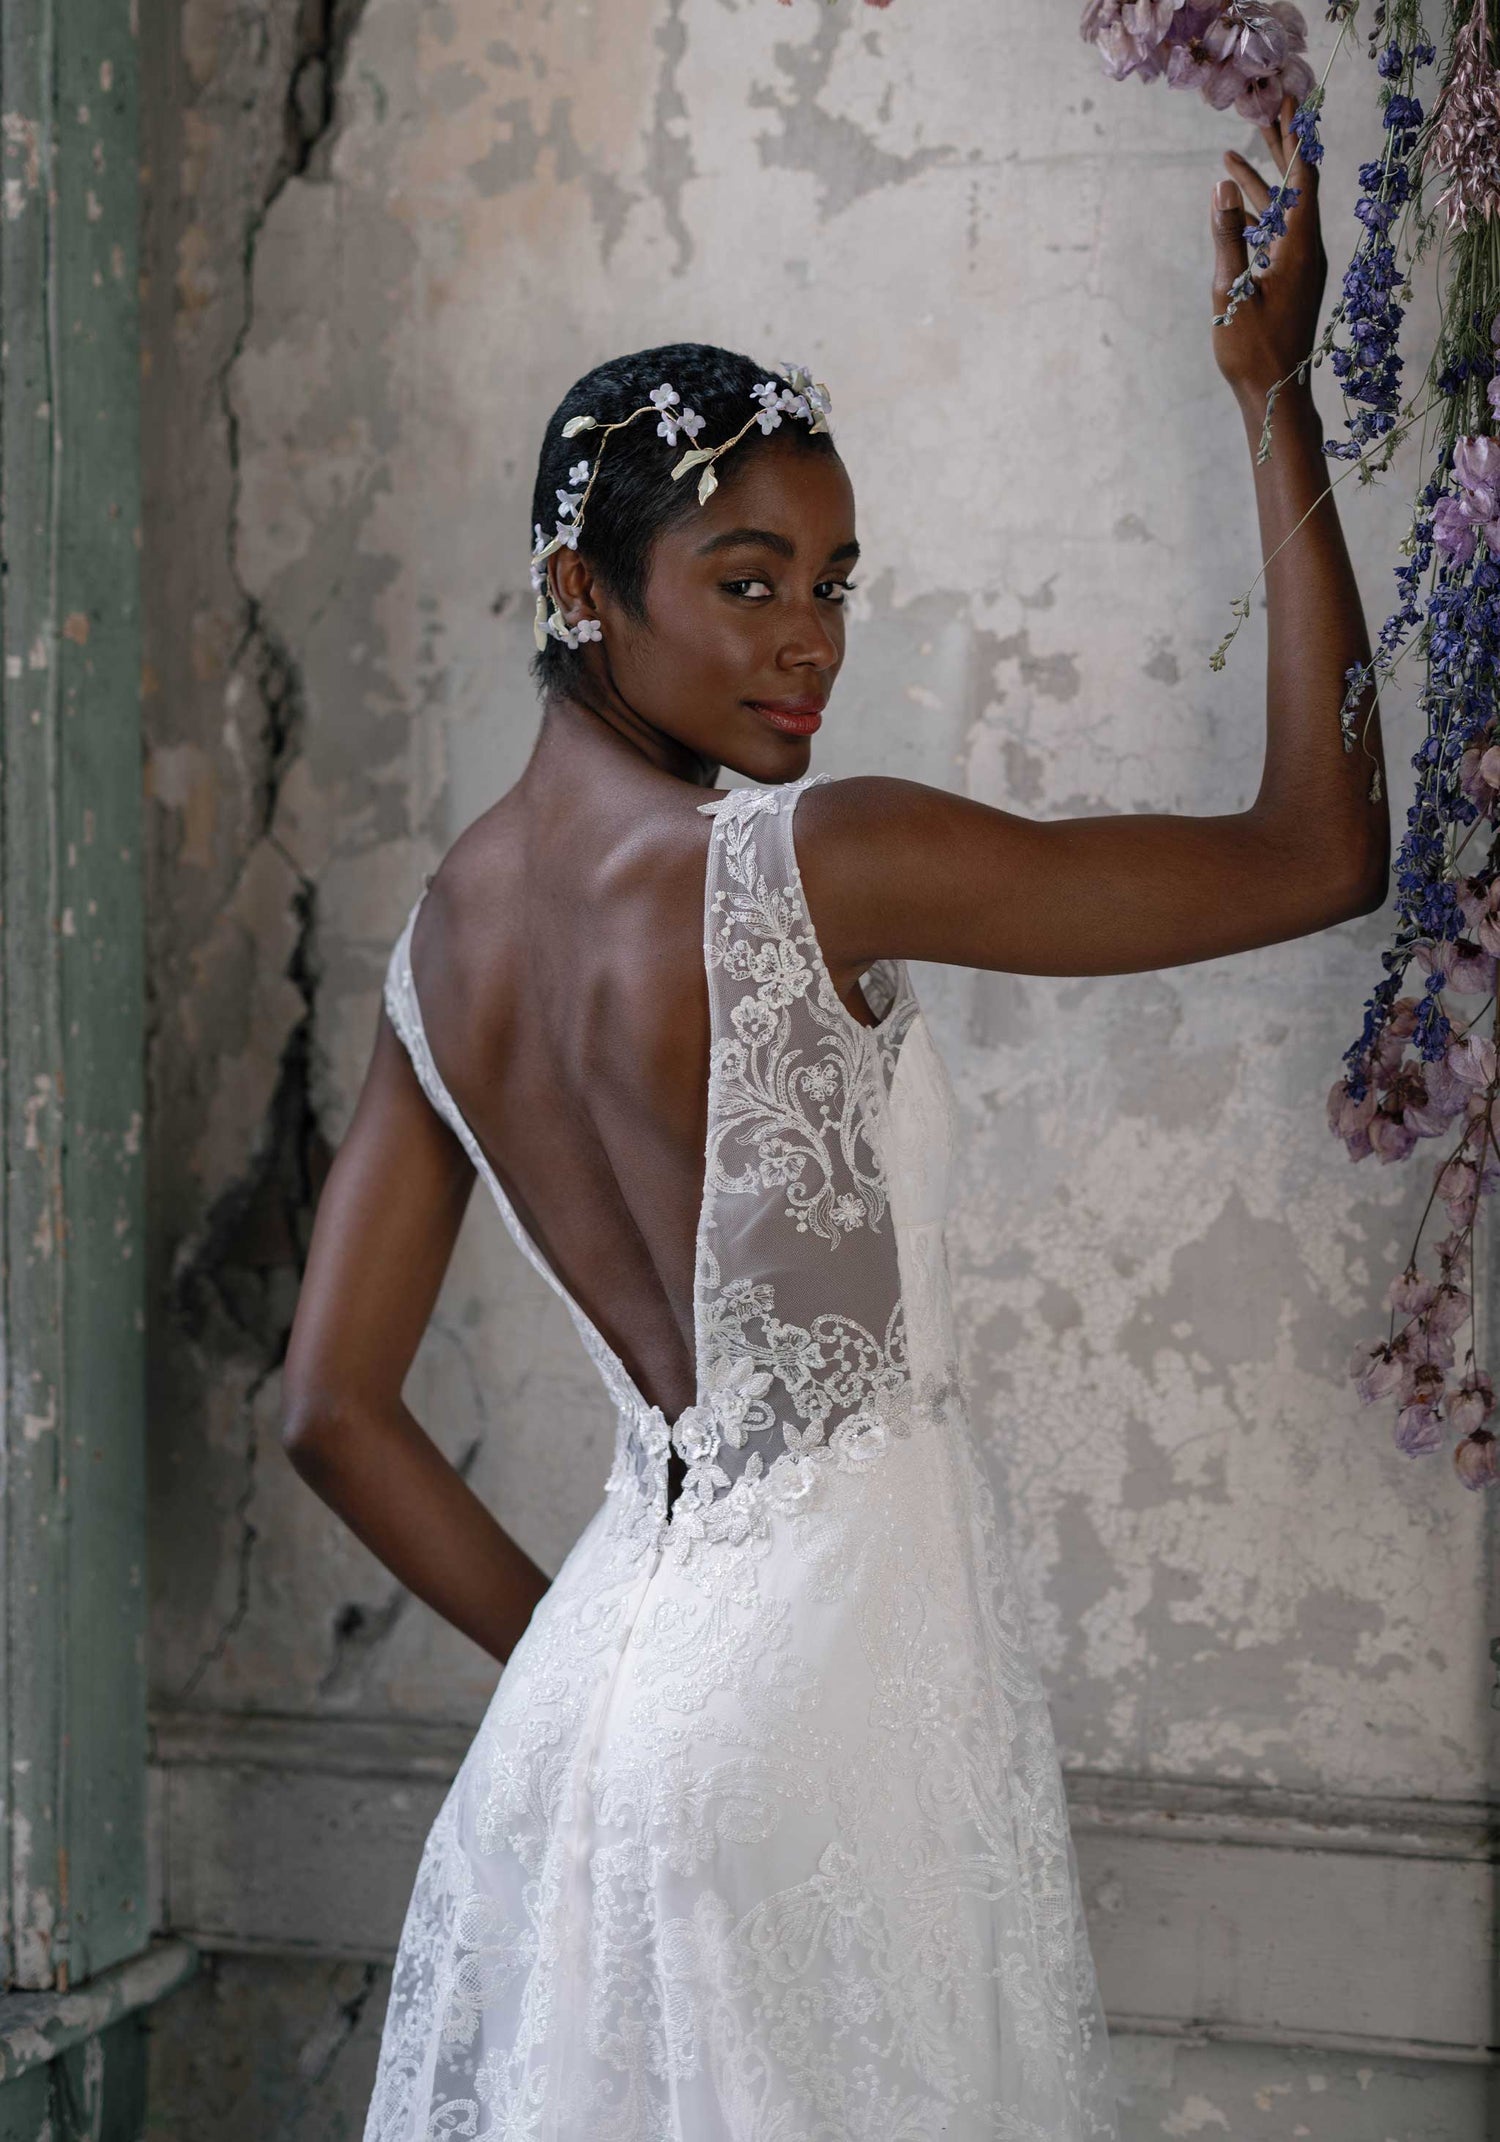 Wedding Gowns 101: Learn the Silhouettes, Wedding Dress Styles